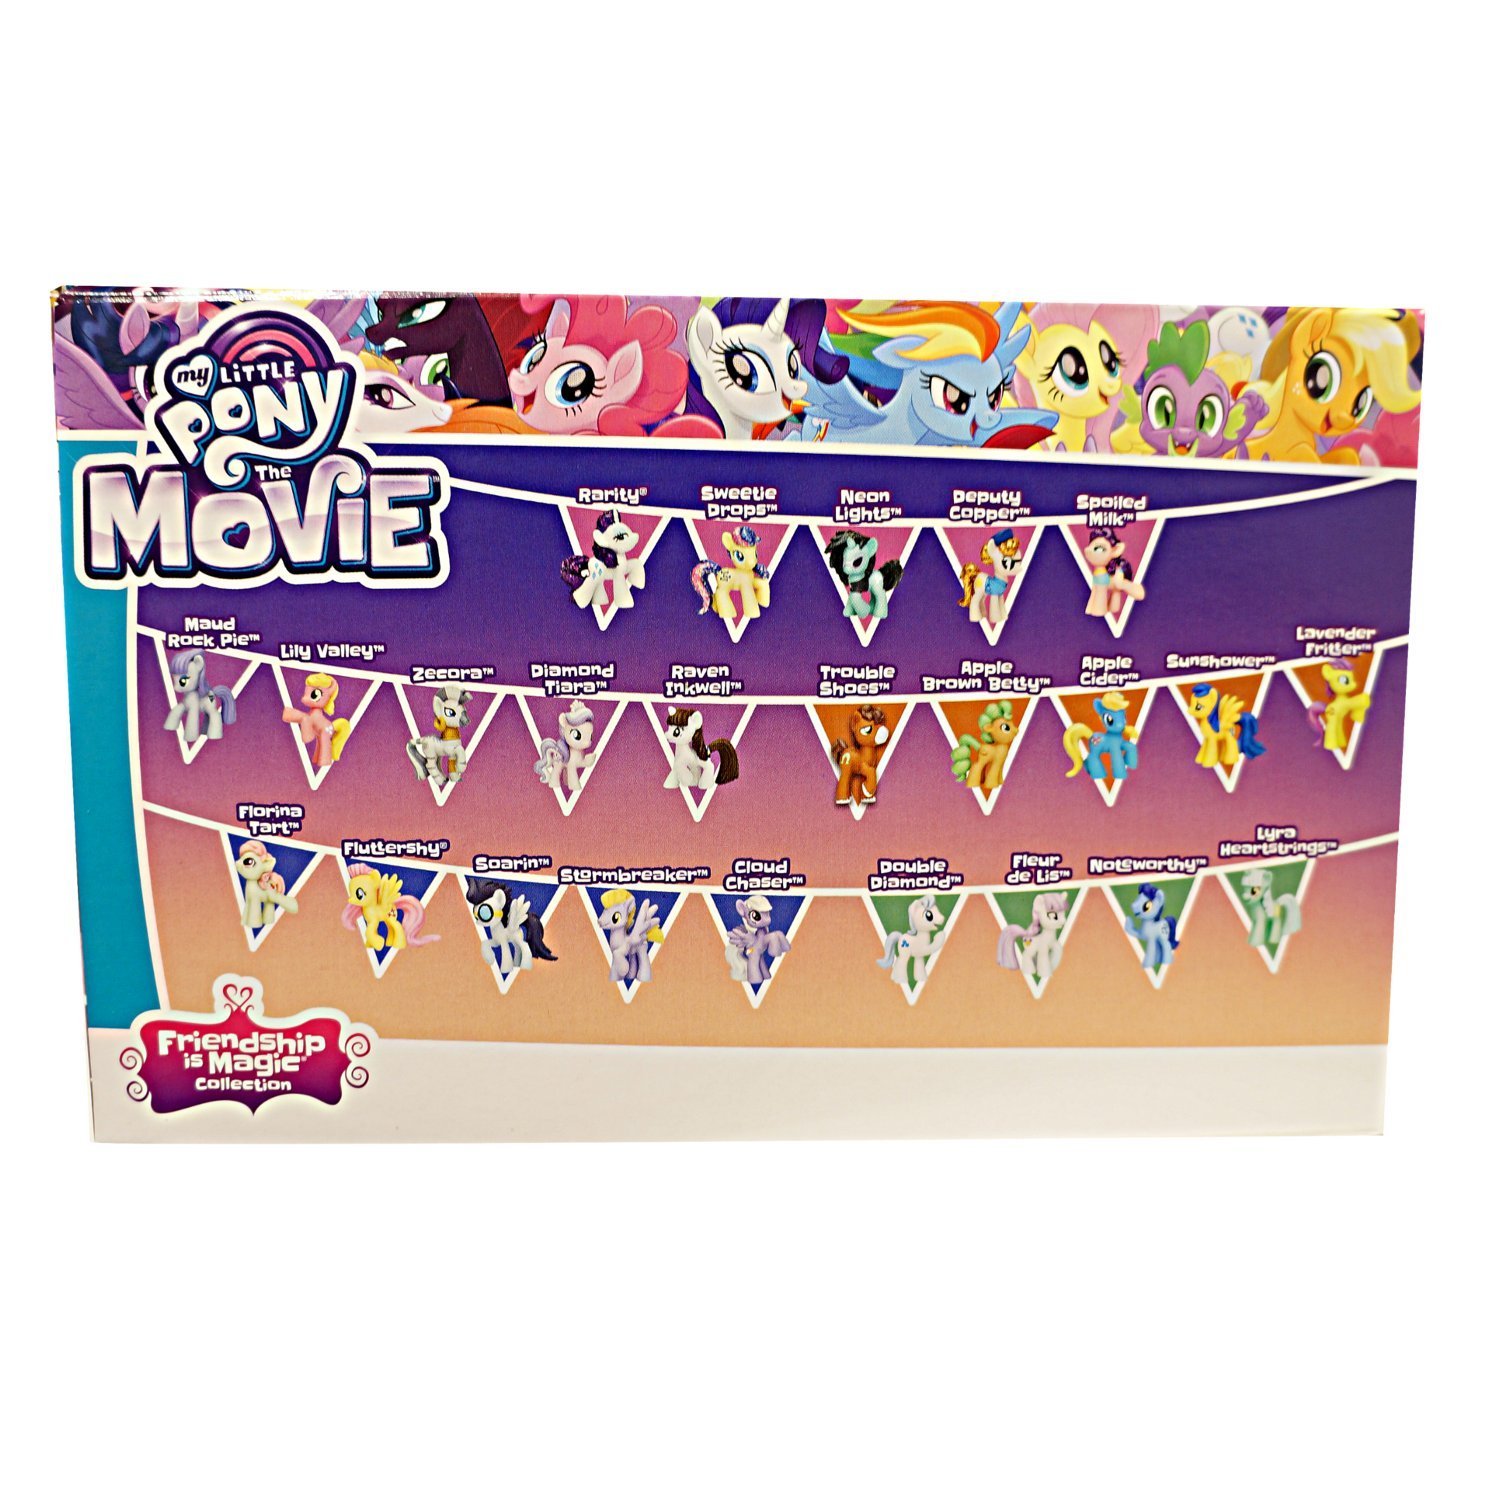 New "My Little Pony: The Movie" Blind Bag Characters 